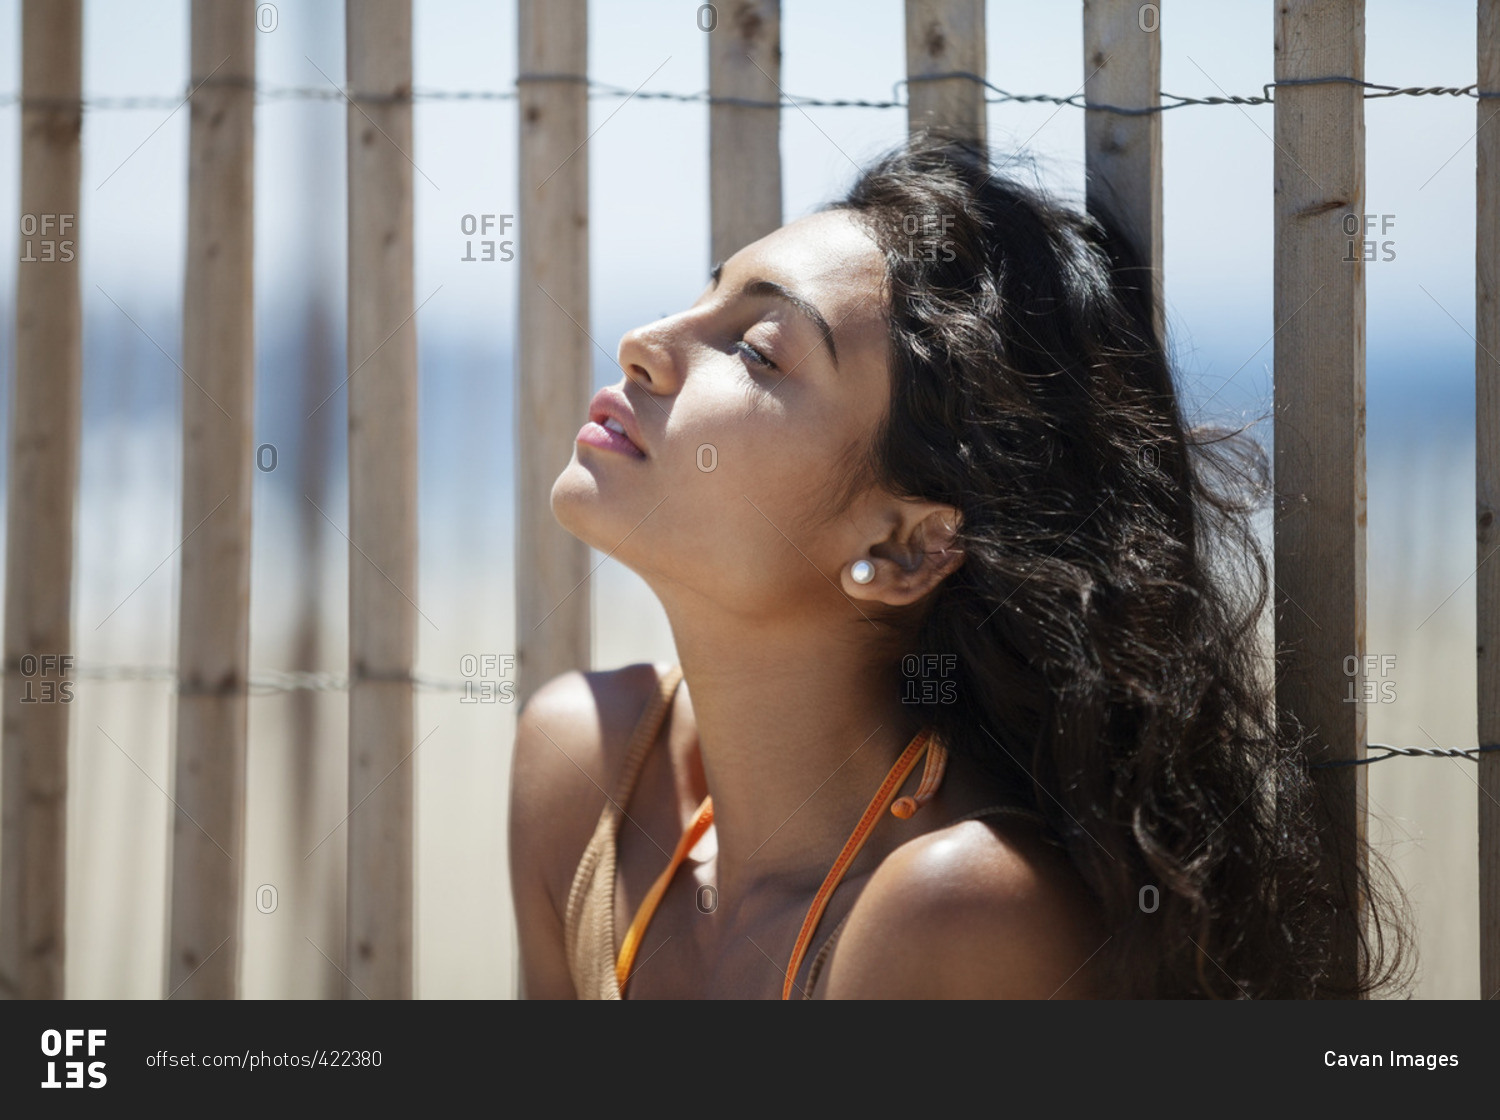 Relaxed woman sitting against fence at beach